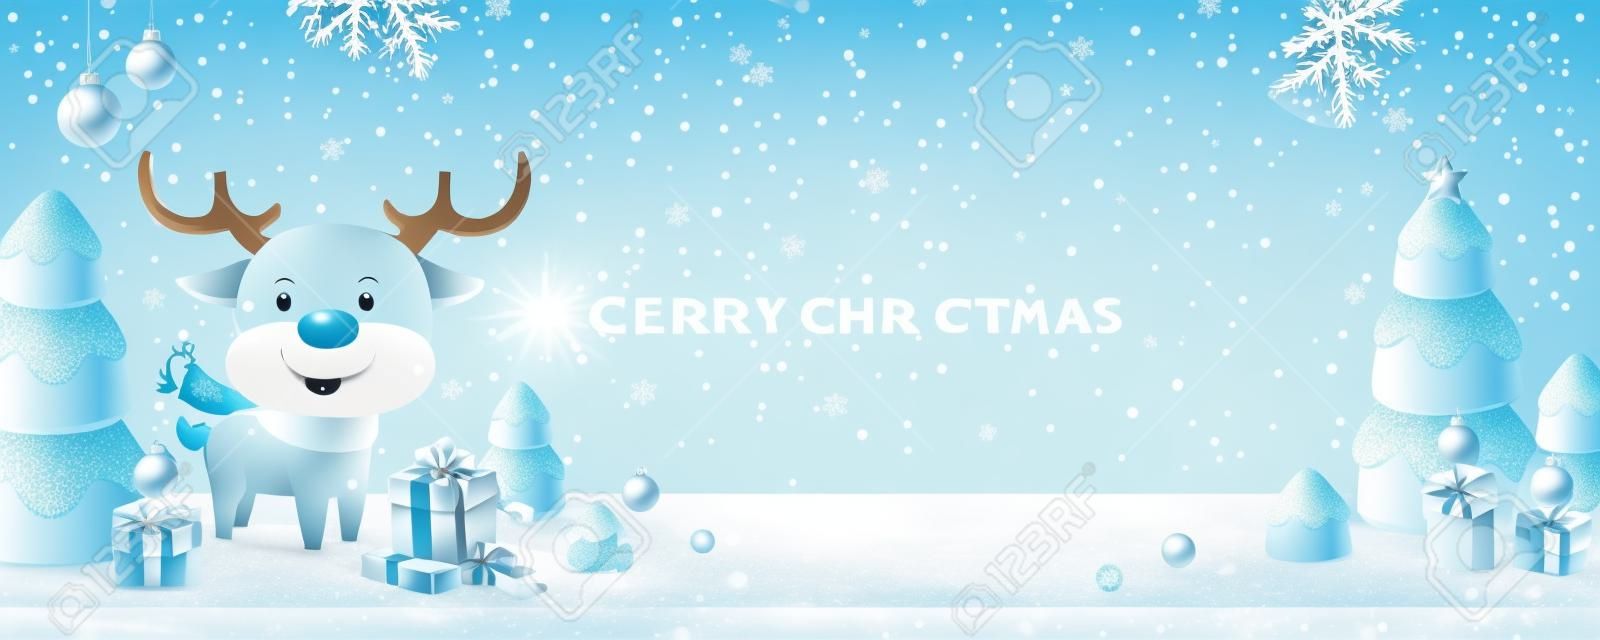 3d Merry Christmas illustration banner in light blue. Cute deer with Christmas trees, bells, gift boxes on the snow surface background